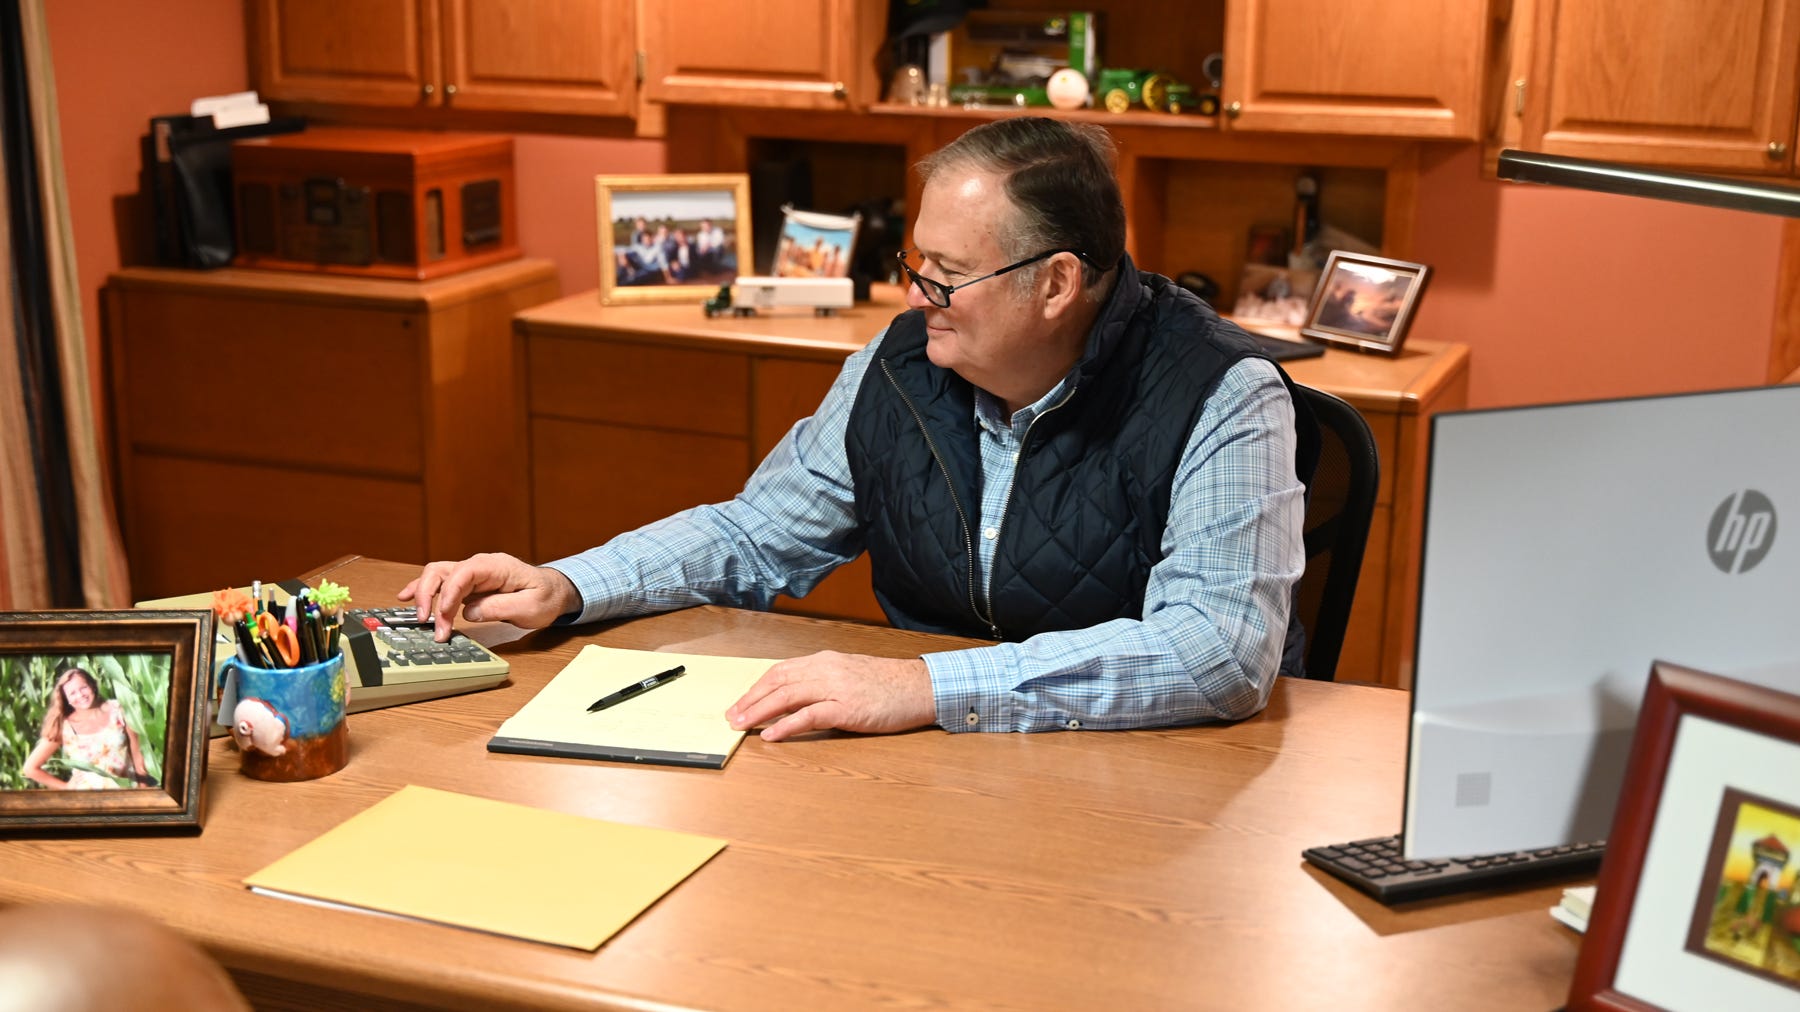 David Meiss working at his desk